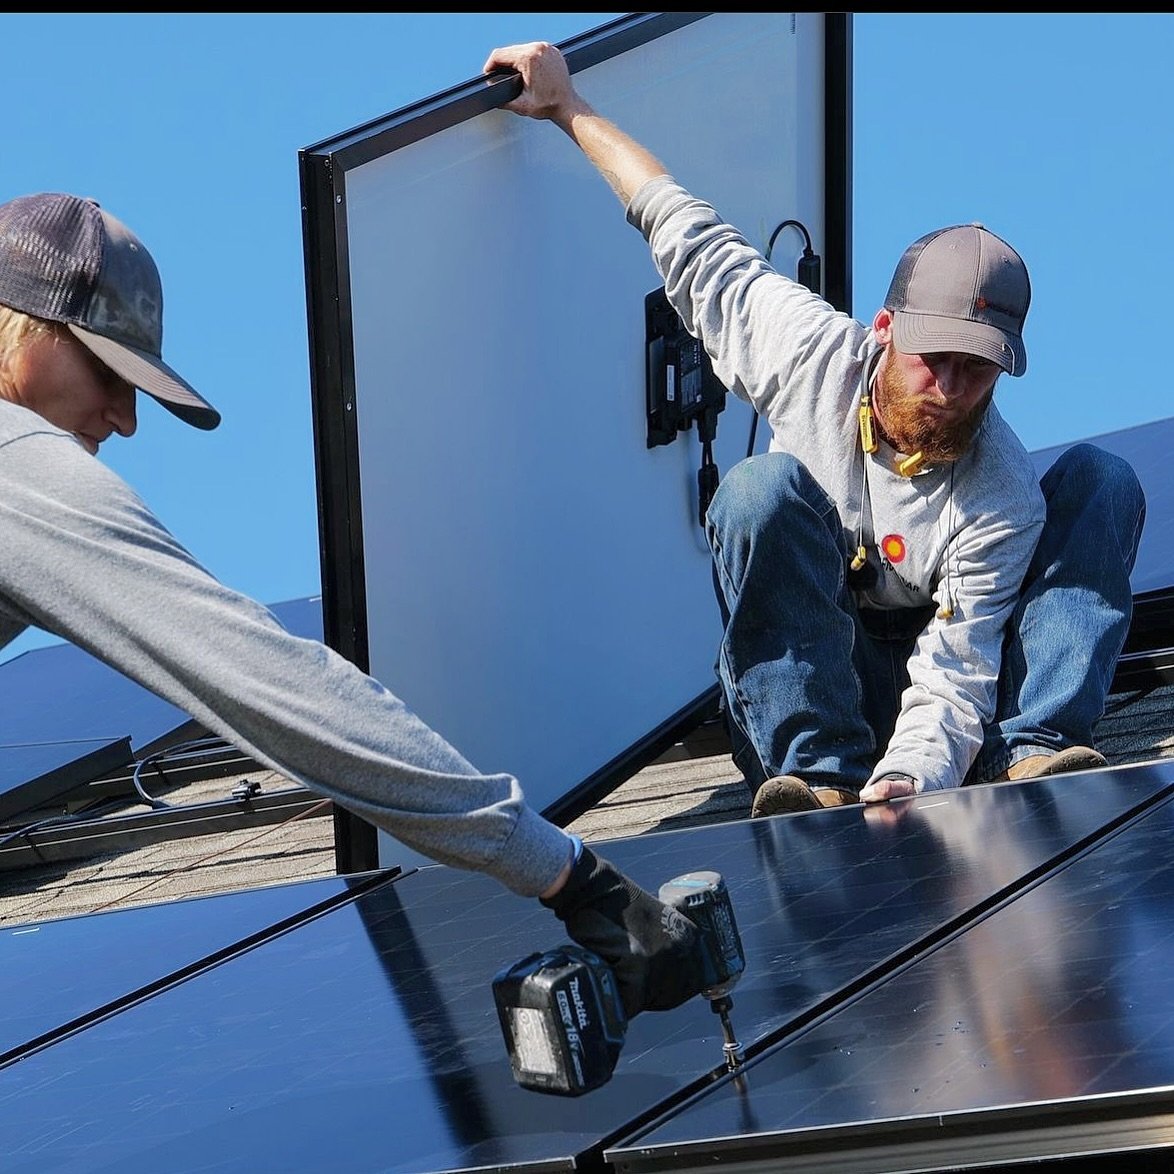 Right after installation you will see your utility bills drop drastically and stay low, while your savings continue to grow over time. 🙌
☎️ Give us a call at (559) 251-5592 to get started! 

☀️ Learn more at the 🔗 in bio. 

#PacificSolar #Fresno #S